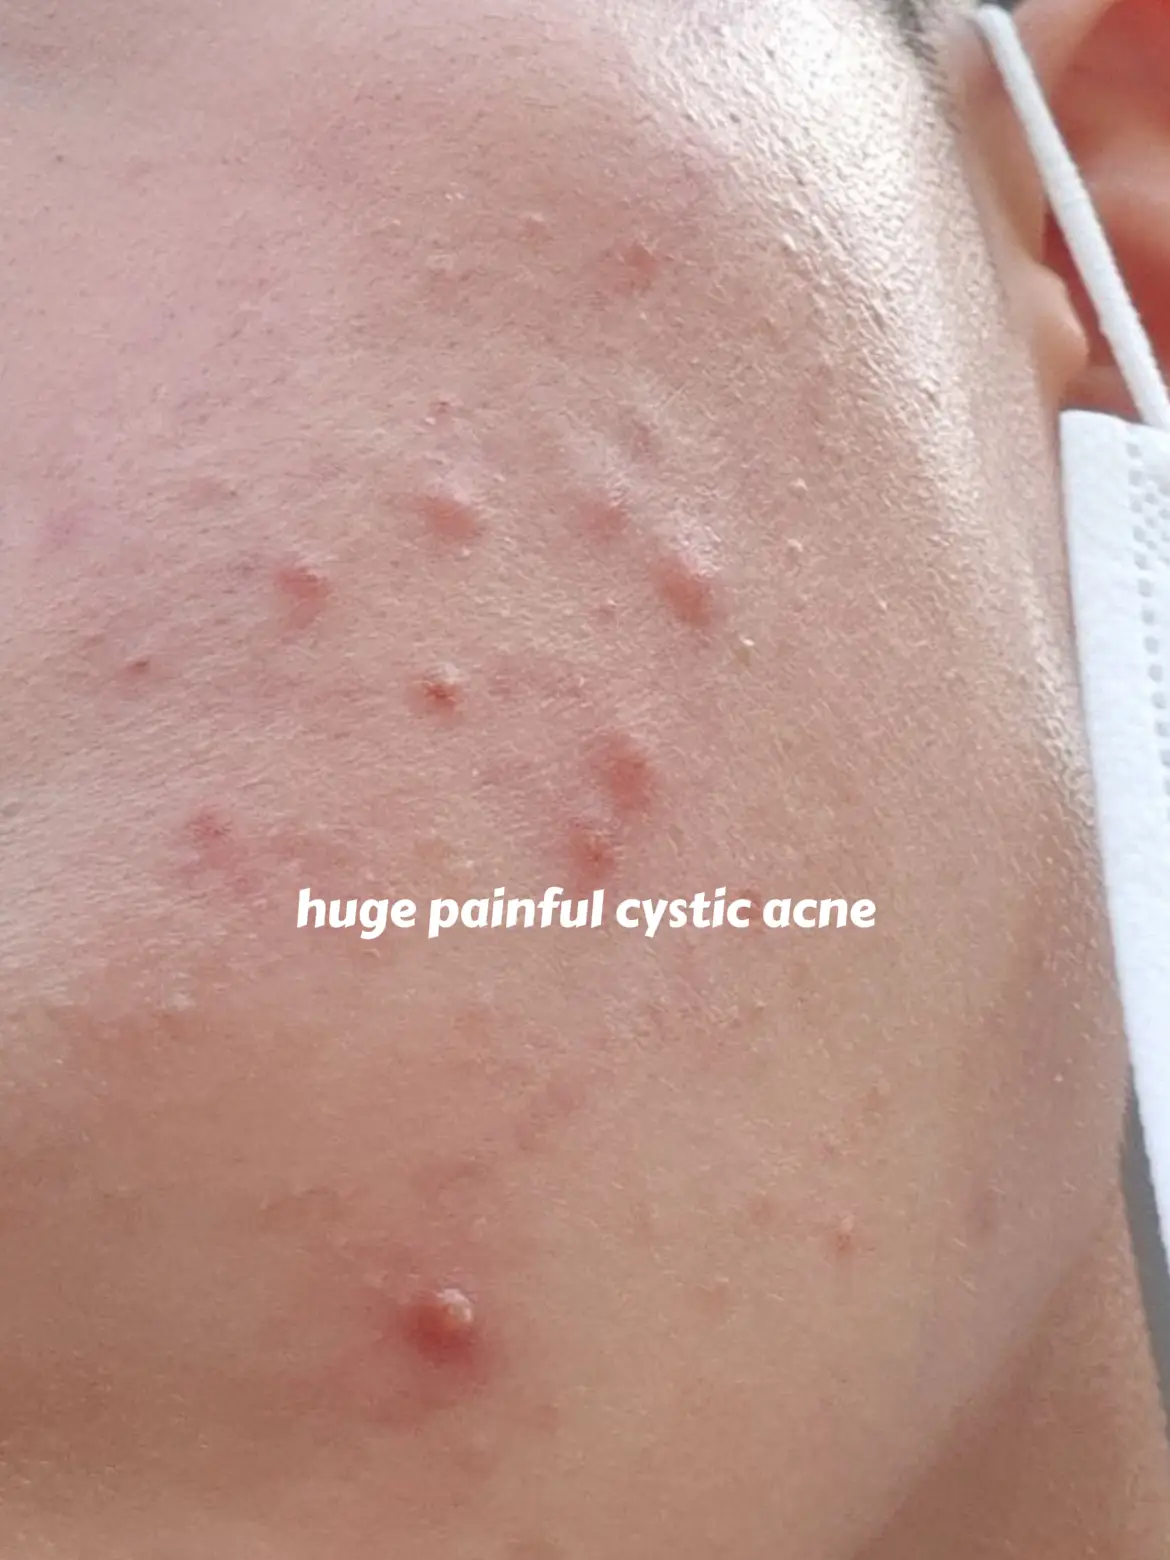 How I got rid of my acne's images(1)